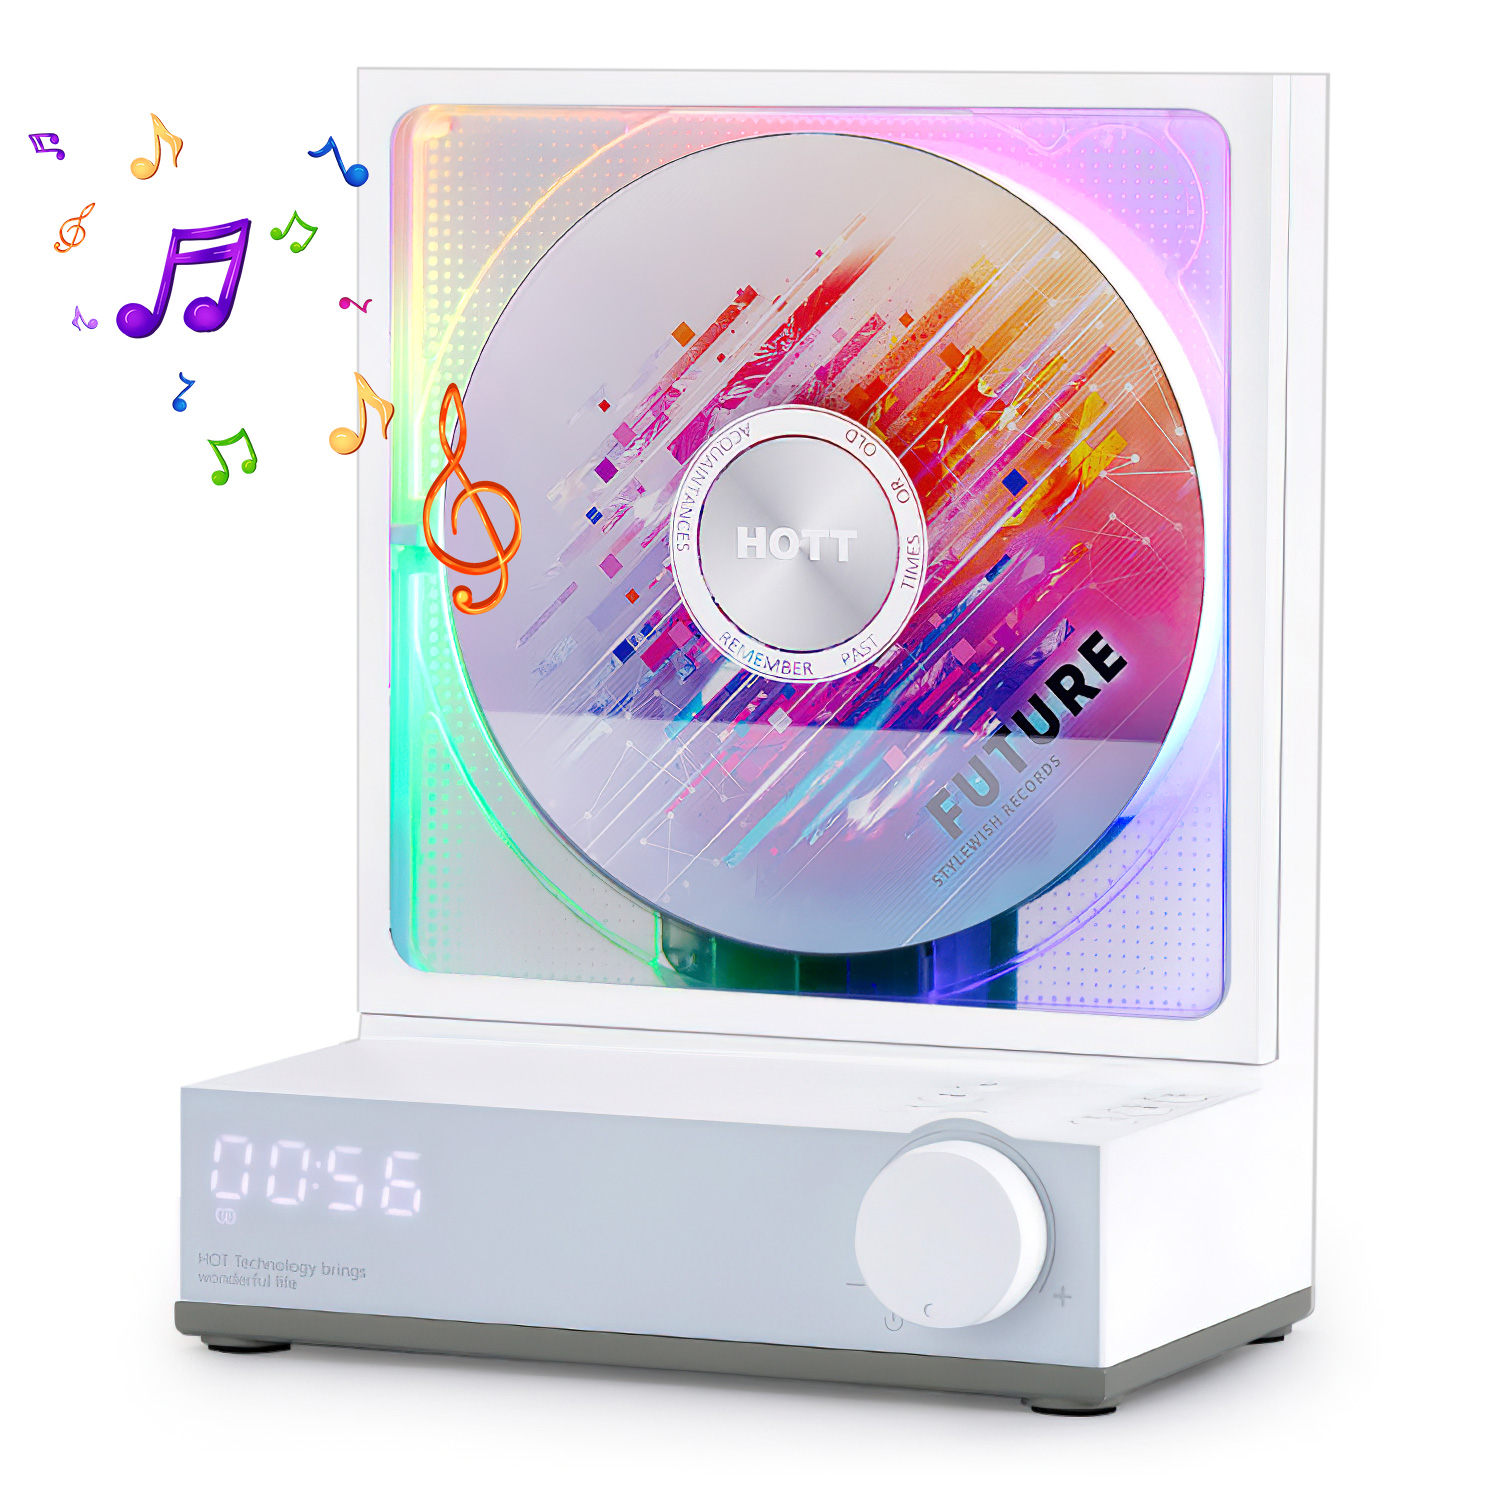 HOTT CD Player Portable Bluetooth Desktop CD Player for Home with Timer Built-in HiFi Speakers Radio CD Player with LCD Display RGB Light Support AUX USB TF Card Playback,CD Disc Transcript To TF Card - image 1 of 9